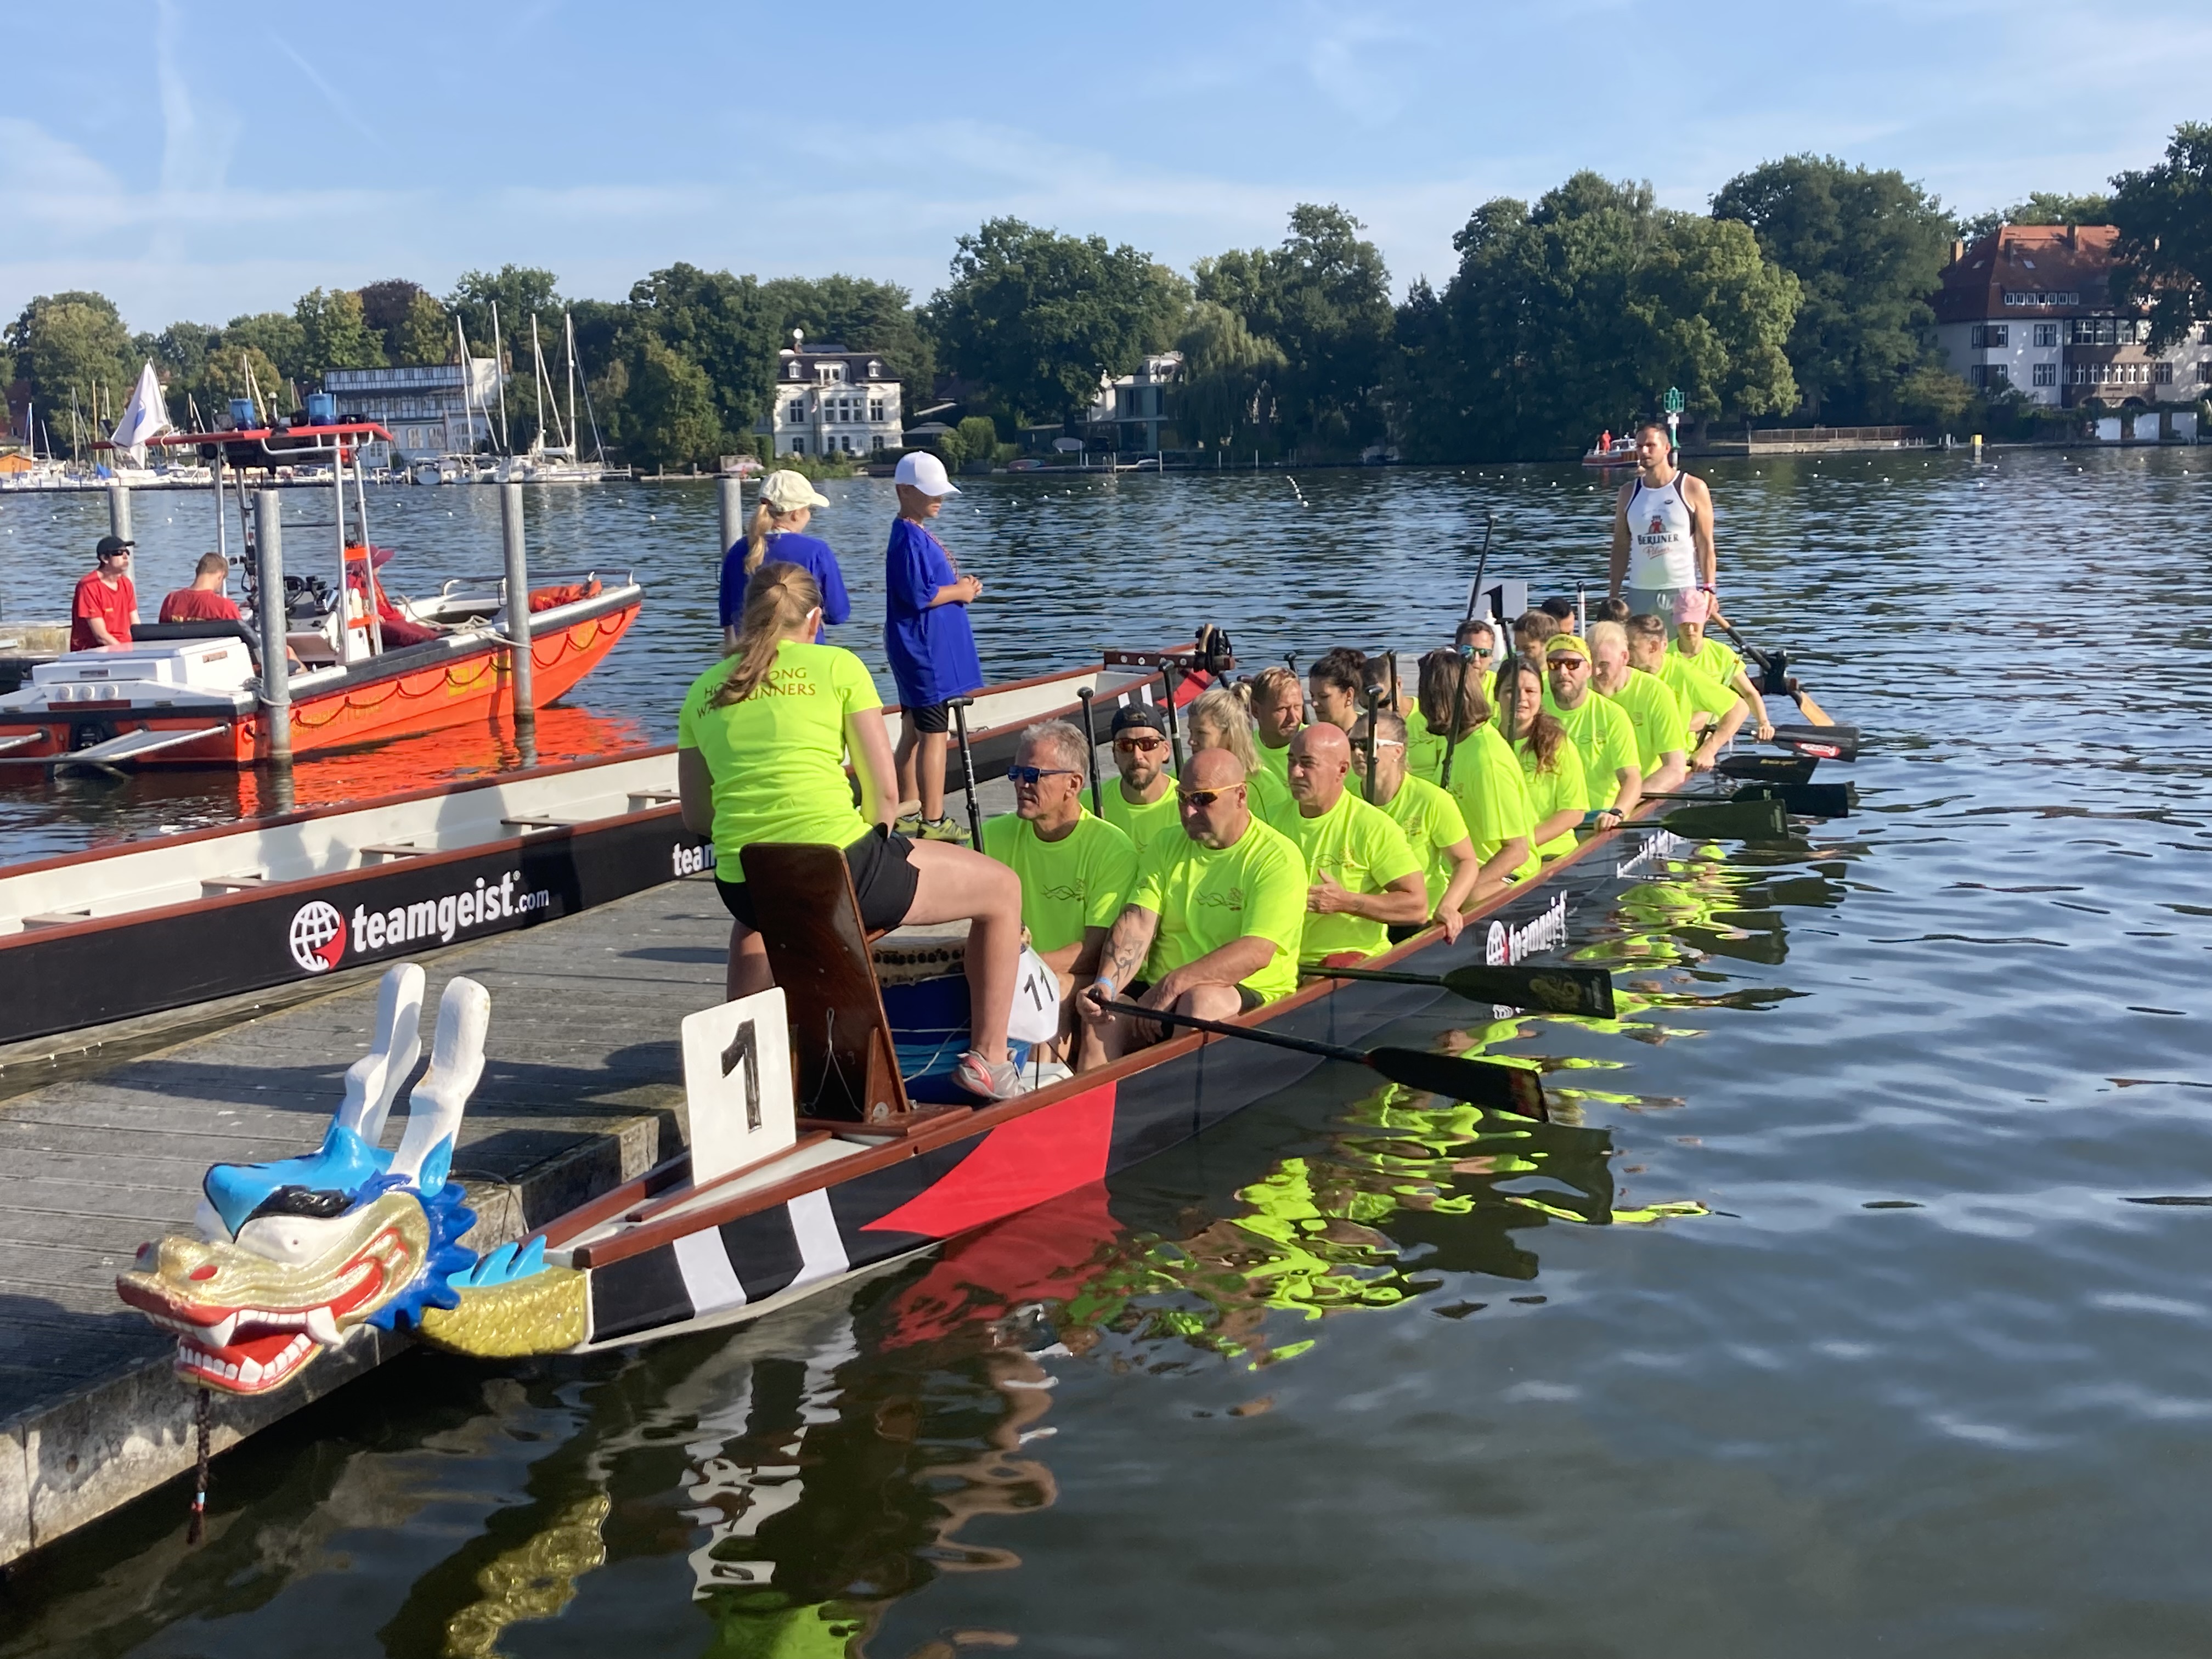 Dragon boats come to live at the Berlin CityCup